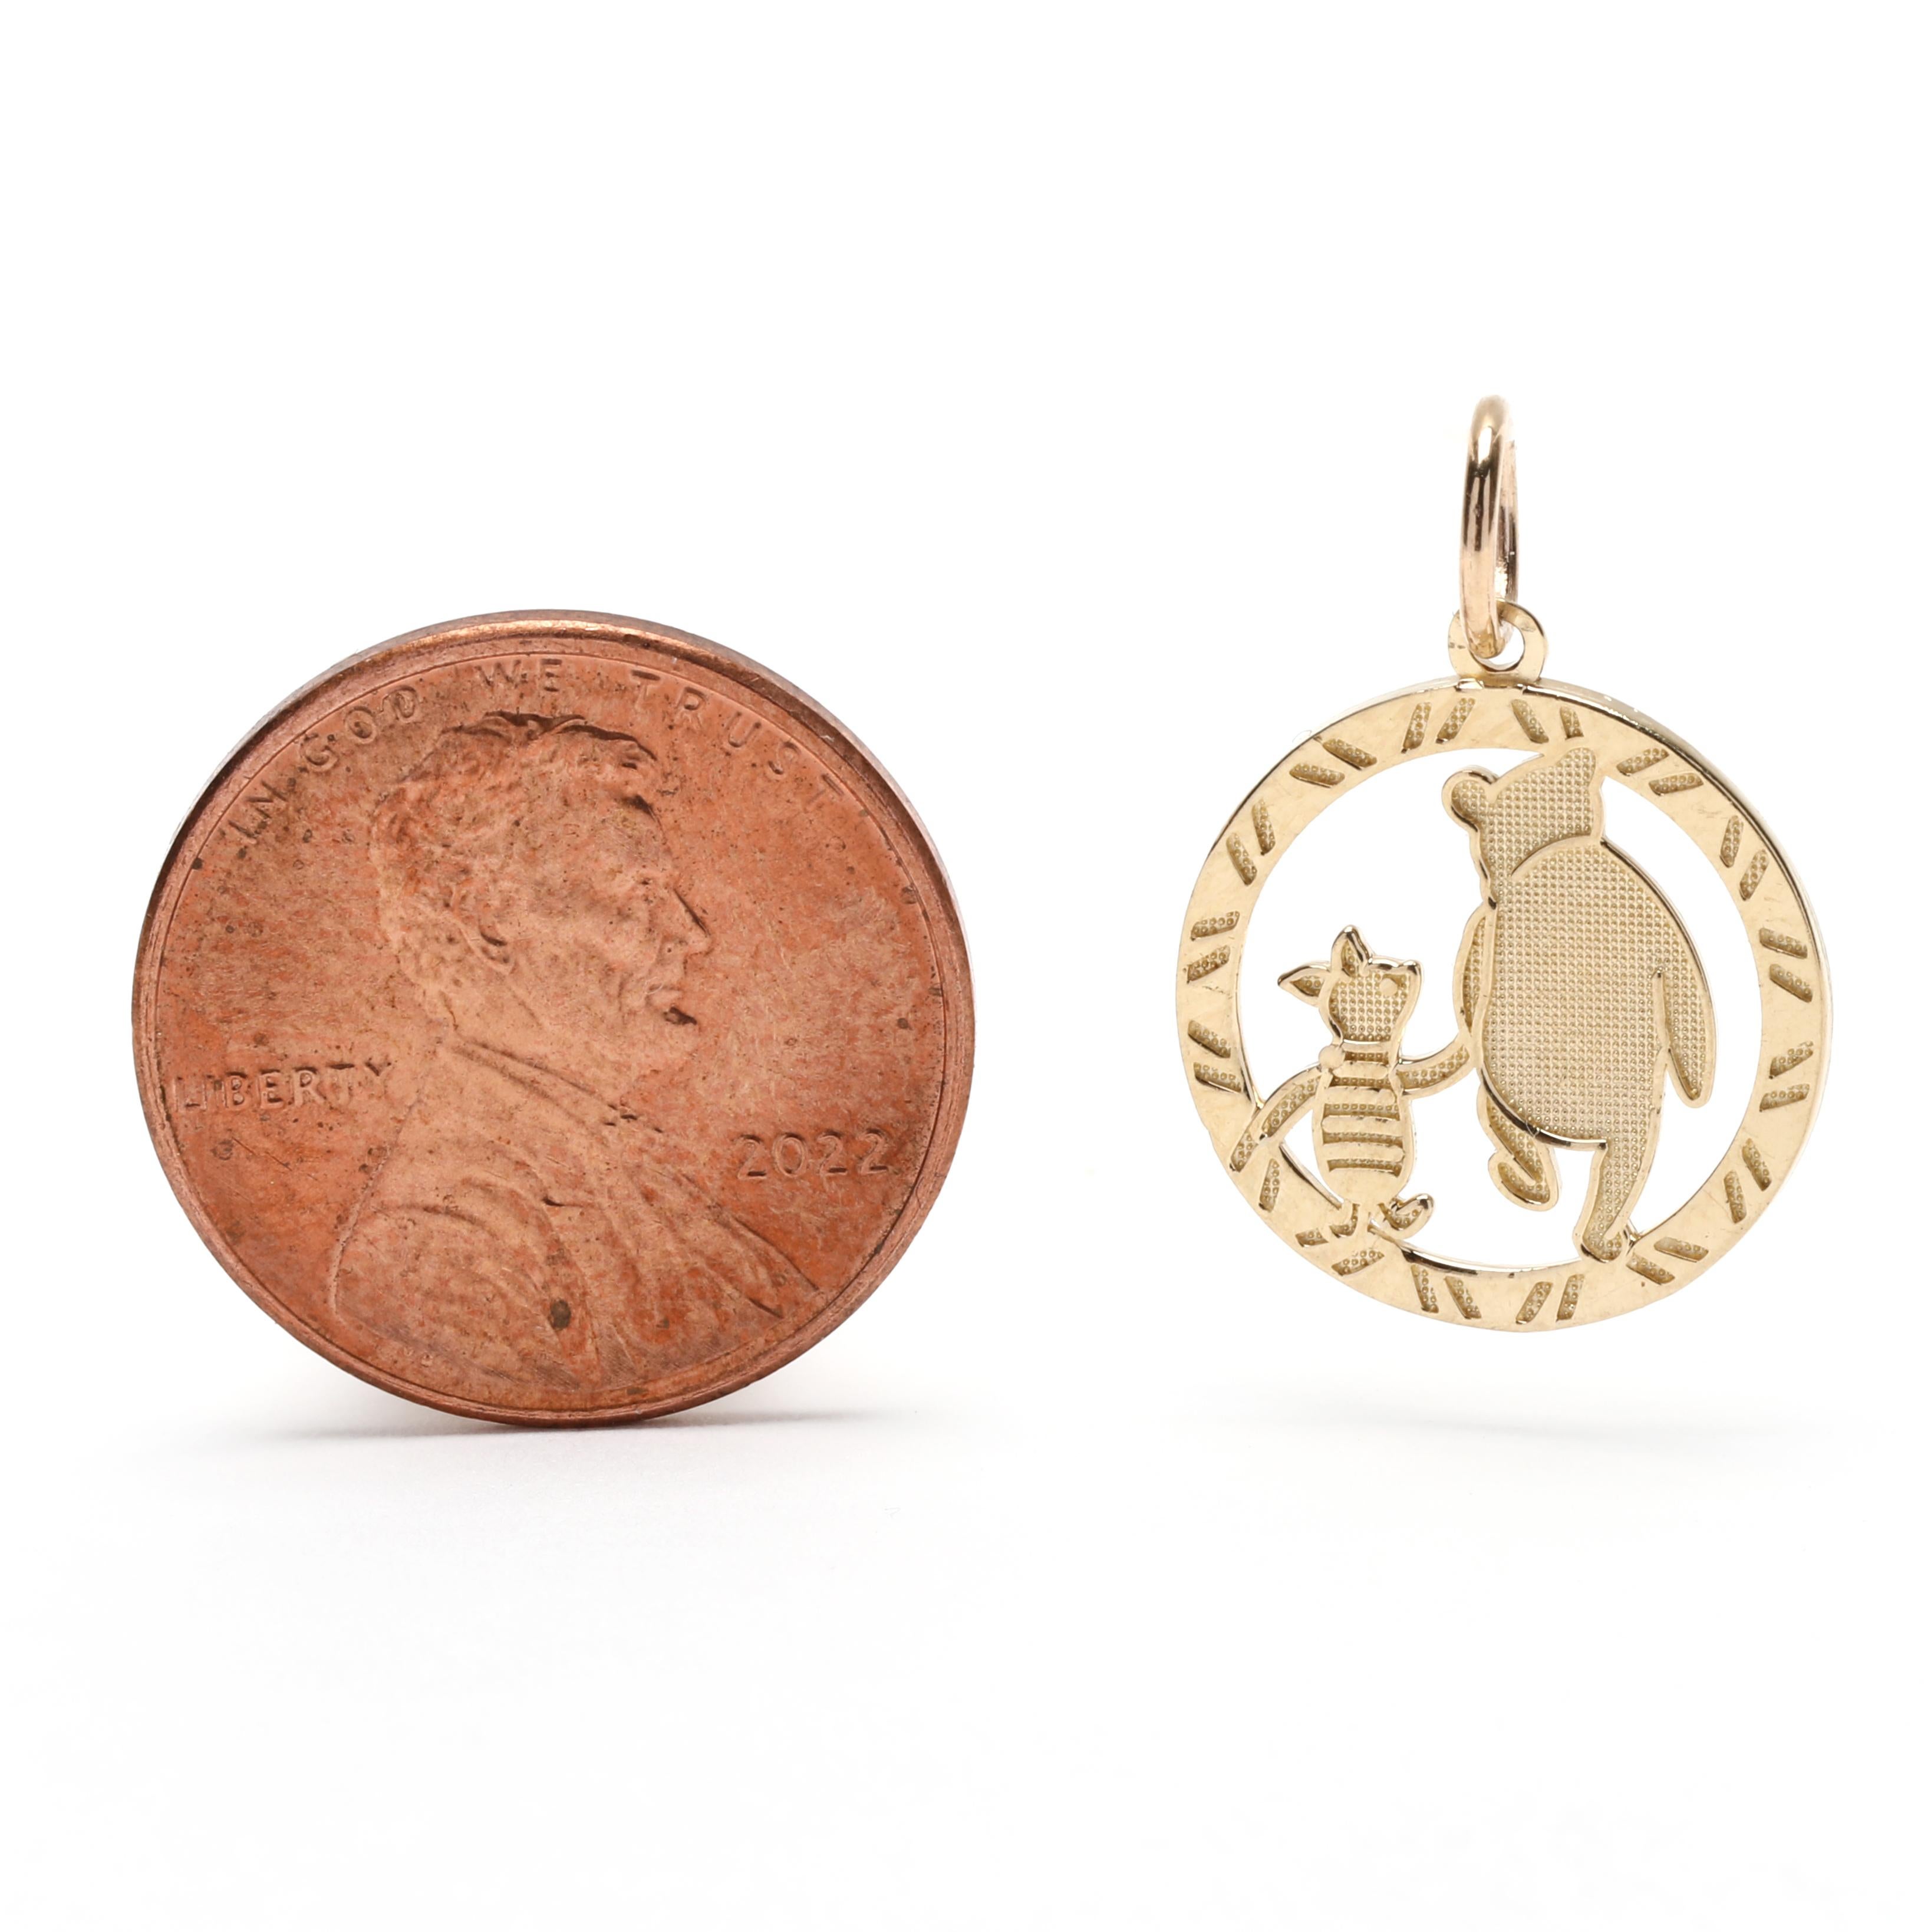 This charming 14K yellow gold Winnie the Pooh and Piglet charm is the perfect way to add a little Disney magic to any necklace or bracelet. The tiny charm measures 3/4 inch in length and features the lovable characters from the Hundred Acre Woods,